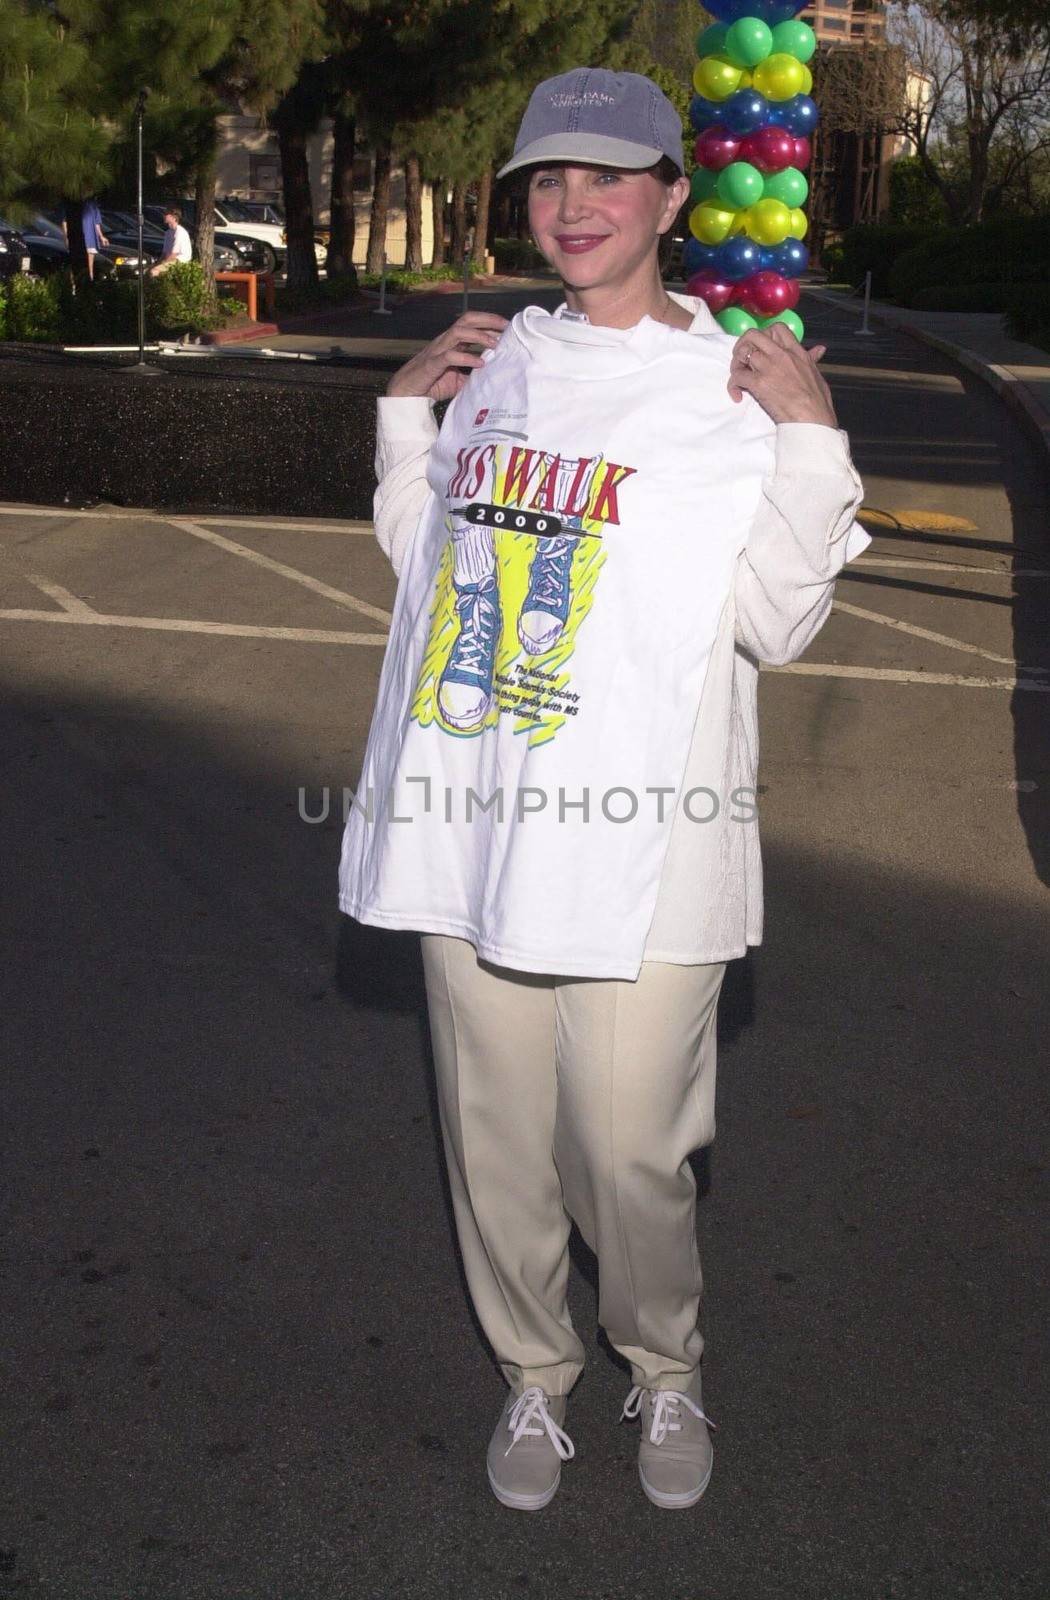 Cindy Marshall at the MS Walk 2000, where the cast of "Laverne and Shirley" reunited. Burbank, 04-09-00